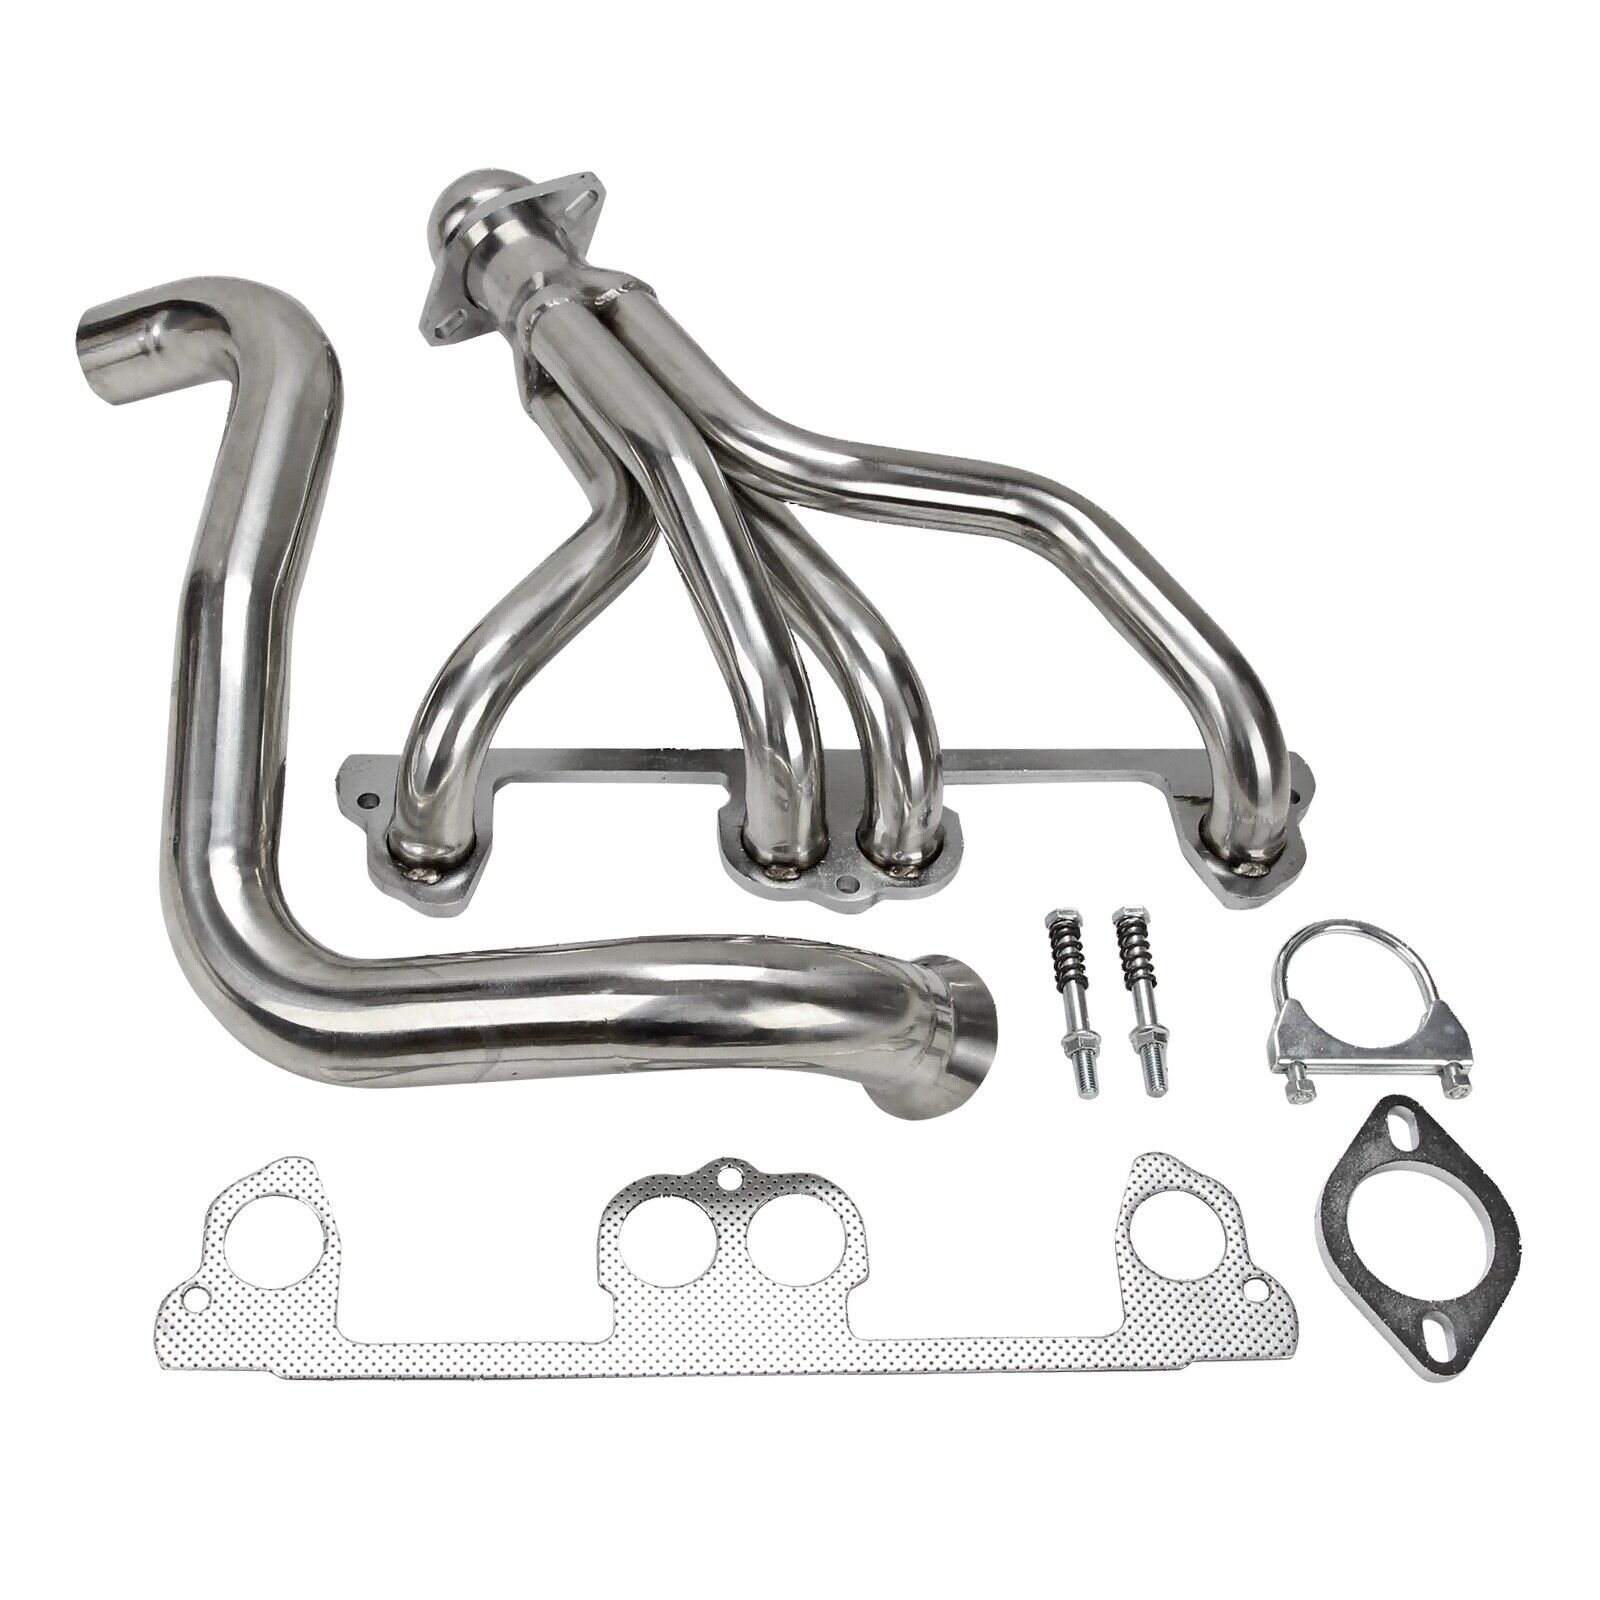 New Stainless Steel Manifold Headers fit 1997-1999 Jeep Wrangler TJ 2.5L L4